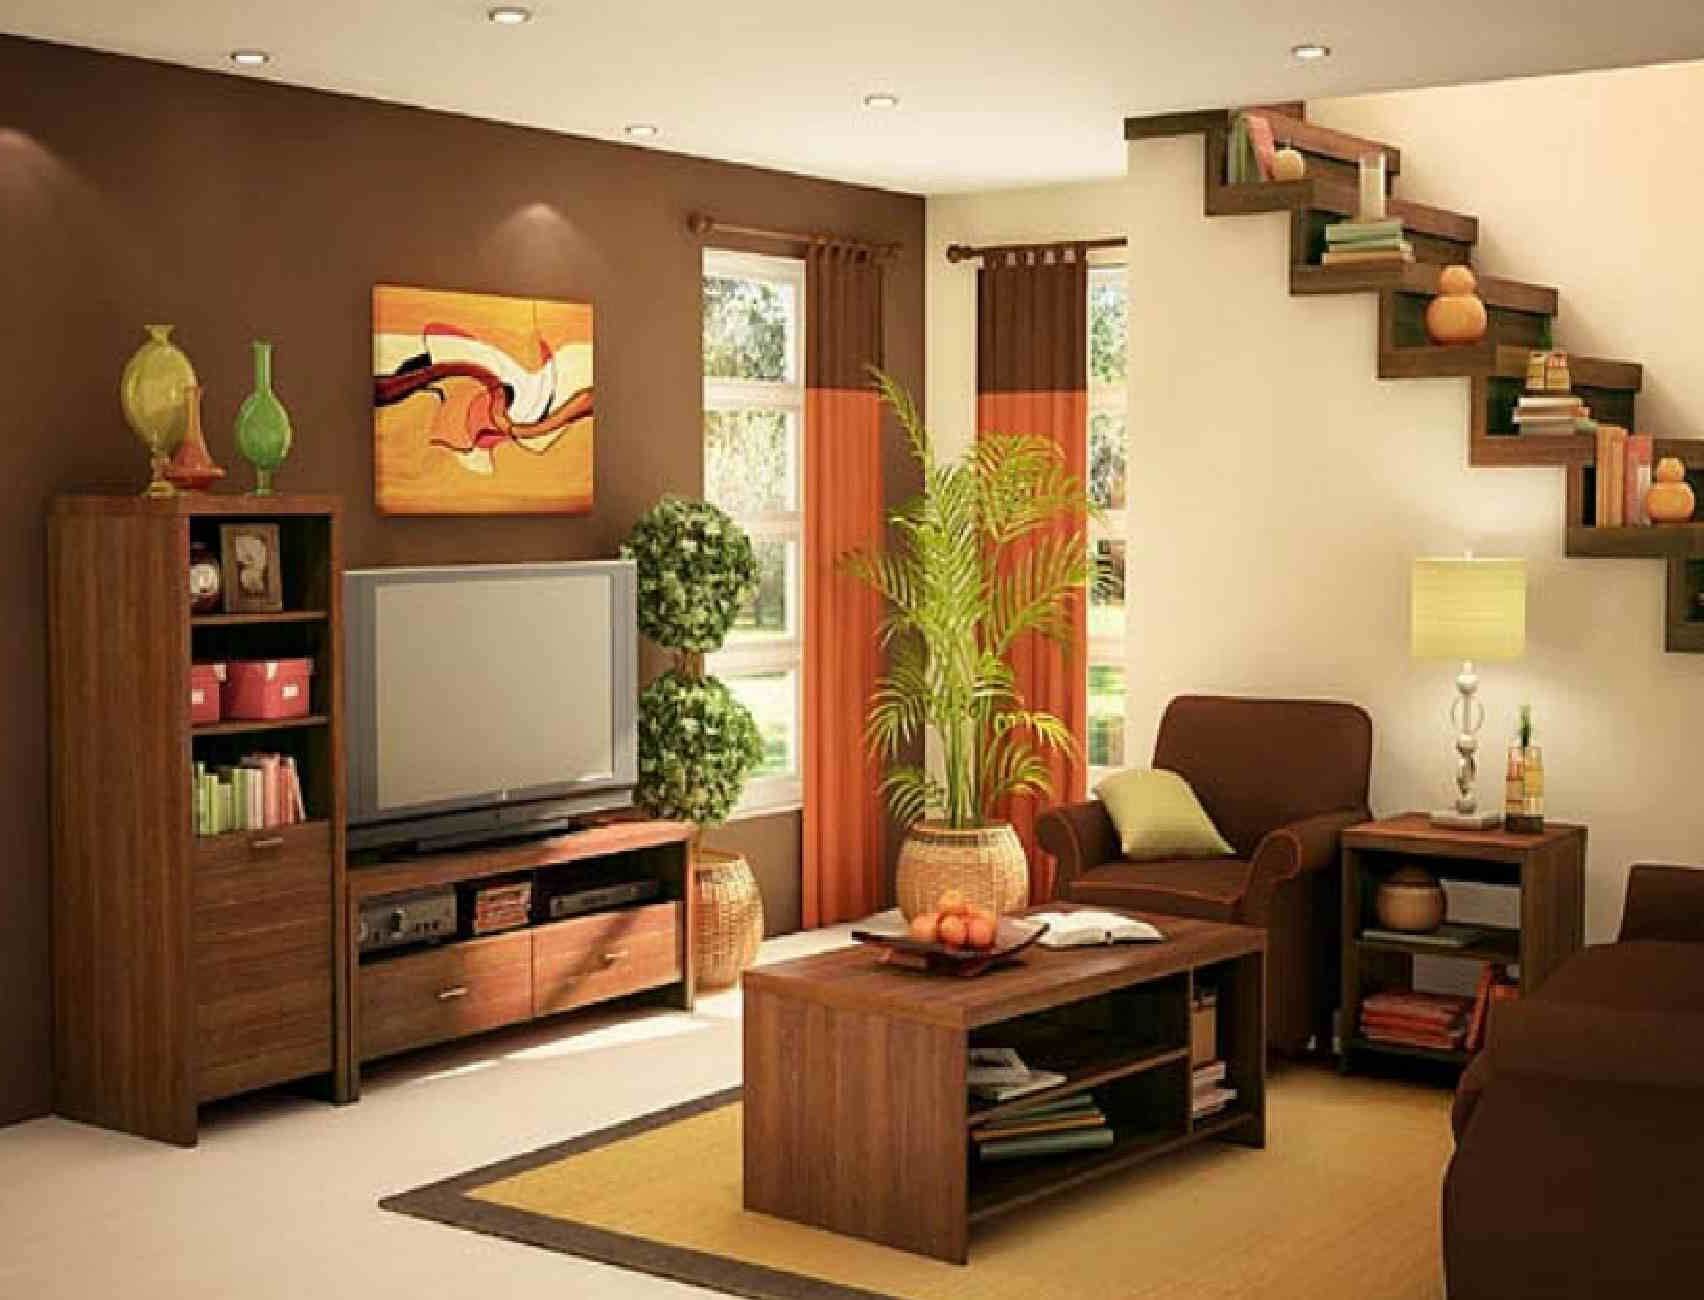 Attractive Interior Designs For Small Houses In the Philippines - Live ...